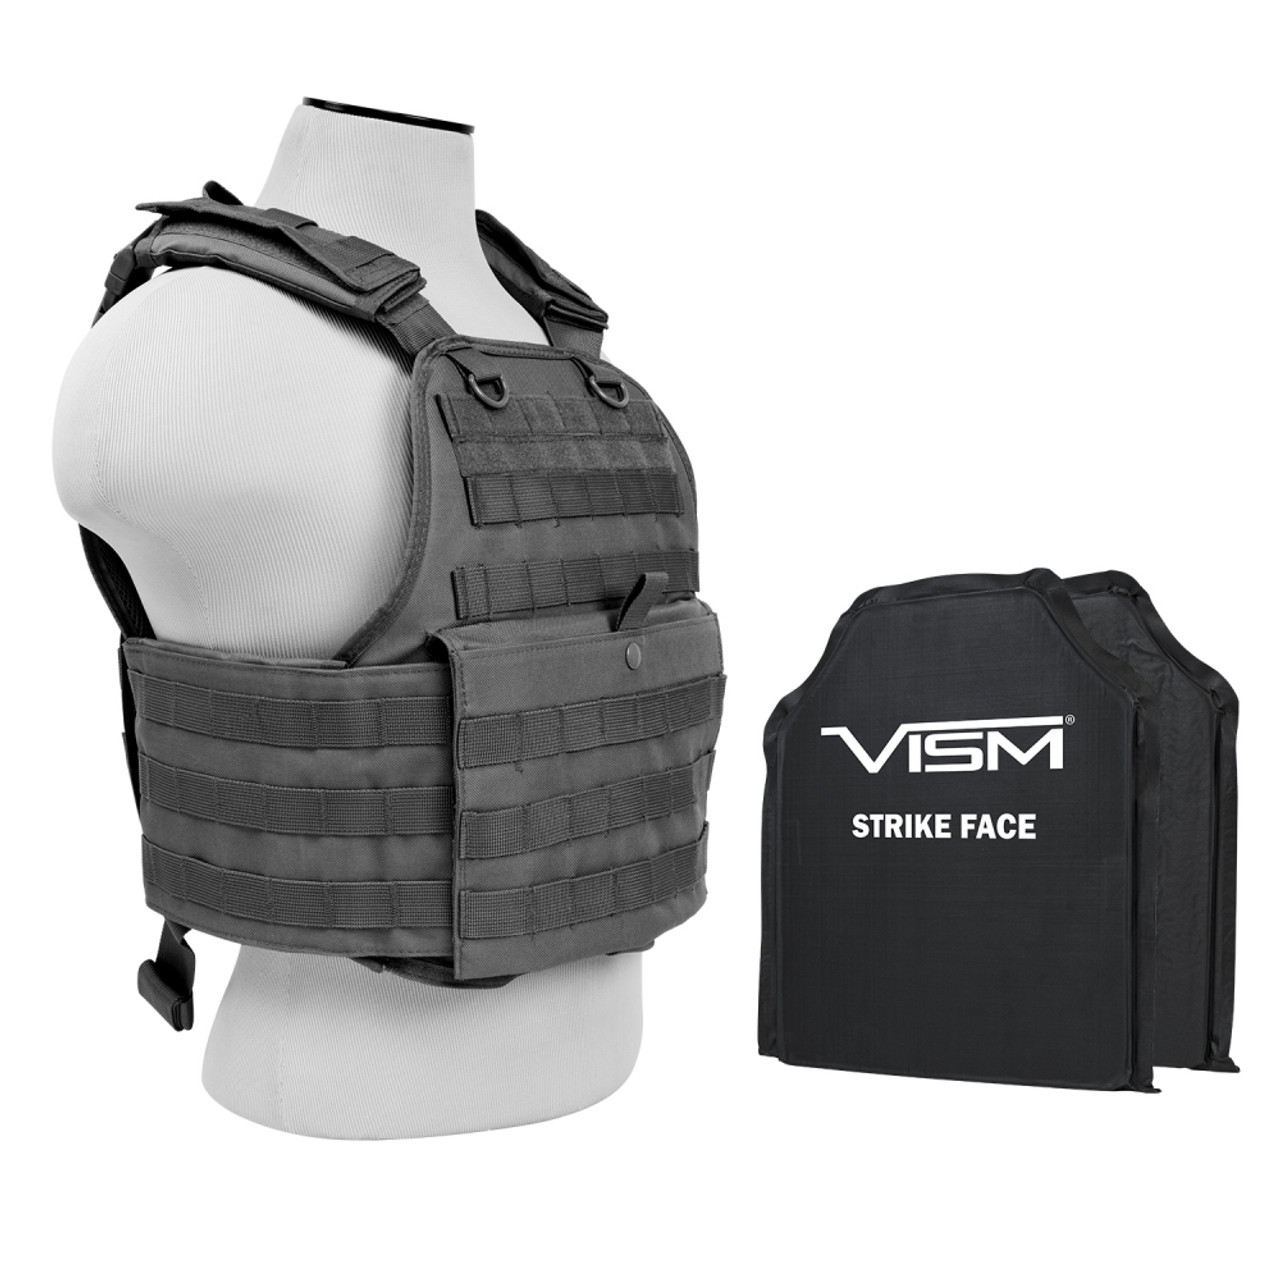 Vism By Ncstar BSCVPCV2924U-A Plate Carrier Vest With 10"X12' Level Iiia Shooters Cut 2X Soft Ballistic Panels